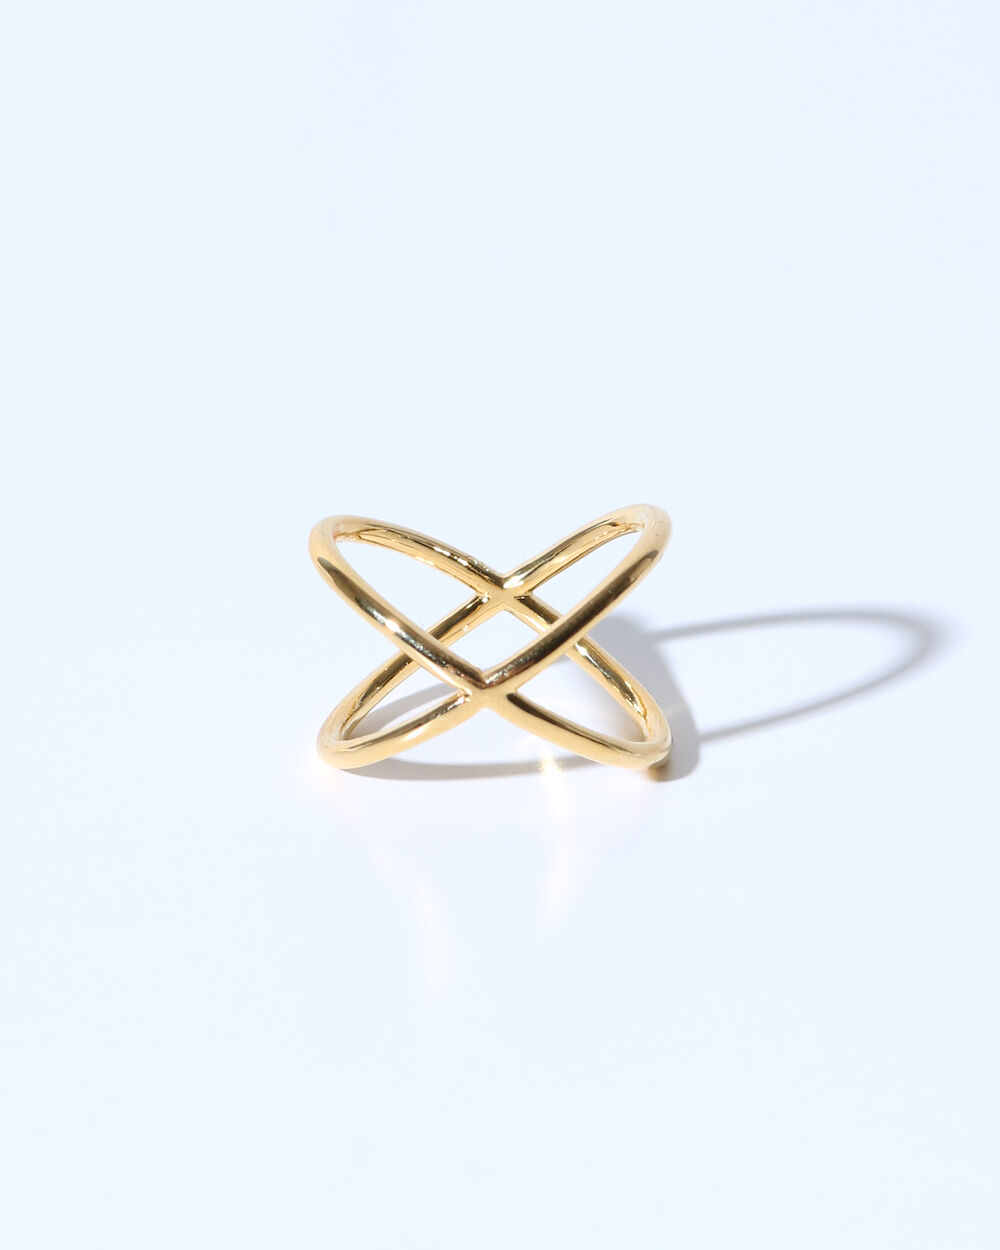 OX JEWELRY Annulus Ring | MB -there is a reason...